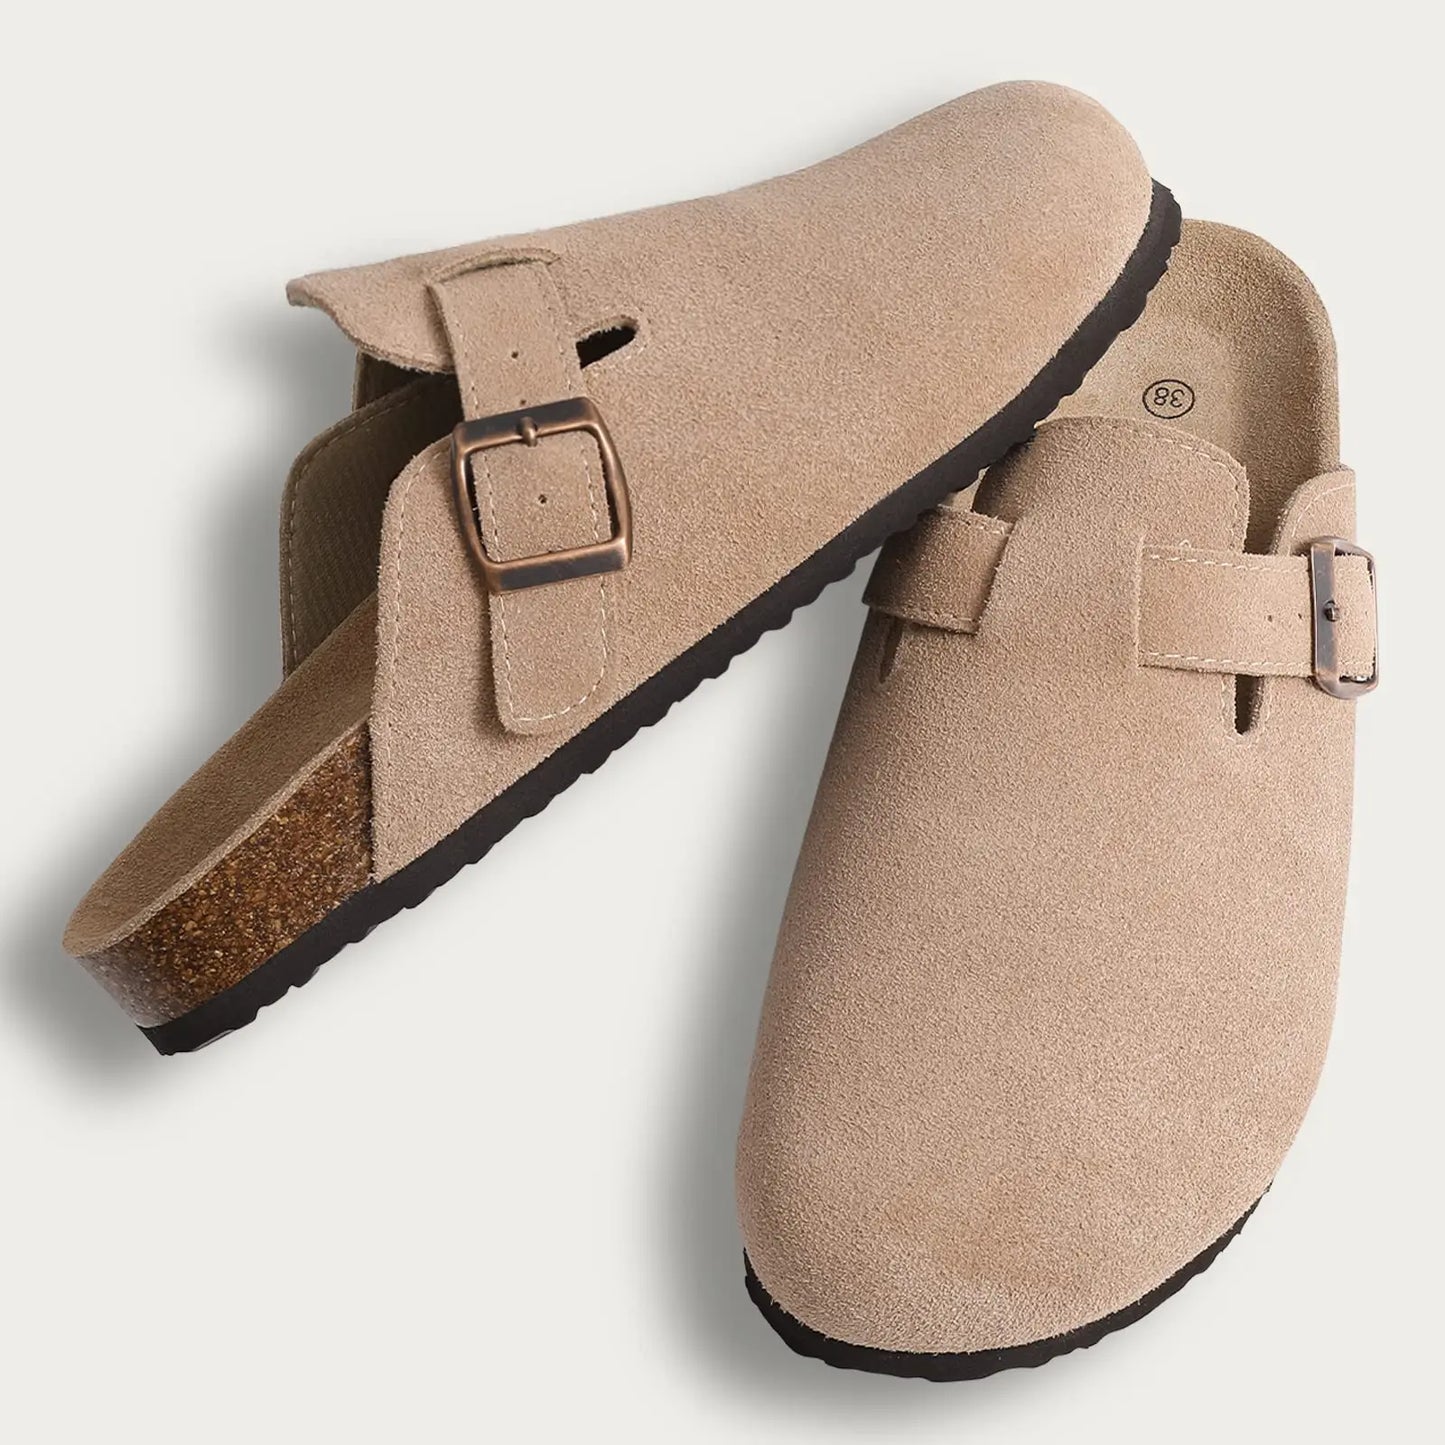 Unisex Slip On Suede Clogs Slides With Arch Support And Adjustable Buckle